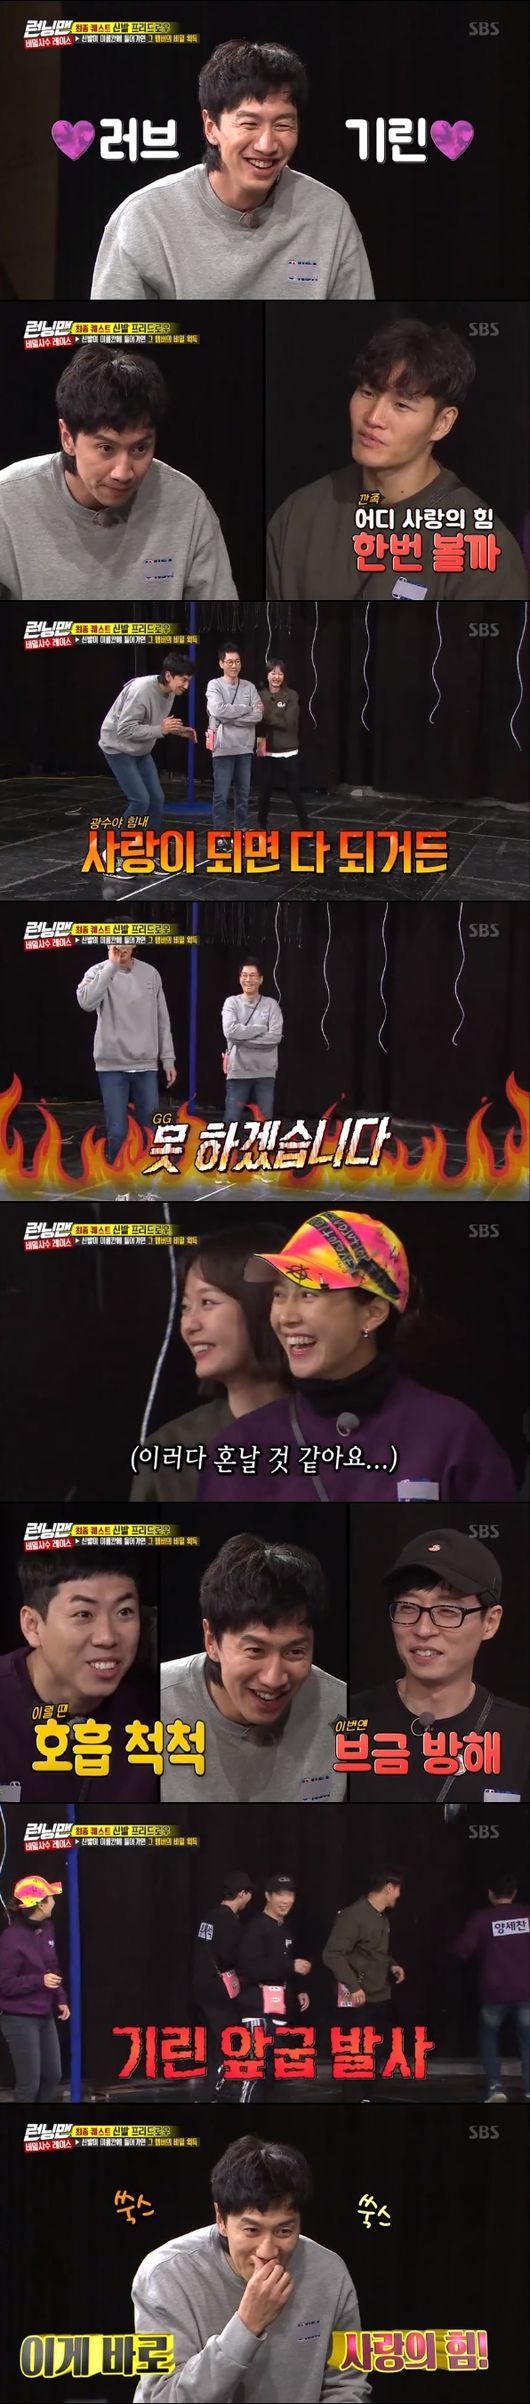 Running Man Lee Kwang-soo was ashamed when he mentioned his devotion to Lee Sun-bin, and the fact that Jean So-min was a love erratic was revealed.On SBS Running Man broadcasted on the afternoon of the 13th, Lee Kwang-soo was shown confessing his heart after admitting his love affair with his lover Lee Sun-bin.Yoo Jae-Suk, Kim Jong Kook and Haha have asked questions such as How do you feel after the release of your devotion?, So are you dating? And How much do you love?Lee Kwang-soo said, Ask one by one, let me deal with one, and Jean So-min said, I want to be proud of something.I gave him the number, Haha said, adding that Jeon So-min, Lee Kwang-soo were the perfect business couple.Yoo Jae-Suk said, I do not see Running Man, but there may be viewers who see it because of this today. Lee Kwang-soo intercepted the words, and the members dried Yoo Jae-Suk.Haha laughed, saying, Jae Seok is excited, and Yo Jae-suk said, Its so good if this happens around.Haha asked, Lee Kwang-soo had a character who was a bully, what are you going to do next? and Jean So-min said, Ill try that character once.Ji Suk-jin asked, What did you do with Lee Sun-bin on the 100th? and Lee Kwang-soo replied, Actually, neither is the style to take that.Kim Jong Kook said, If you told me, you would have given me 100 won. Yoo Jae-Suk promised, We will collect 700 won later.Yoo Jae-Suk said, What love will you love in the future?When asked, Lee Kwang-soo said, Many people have been interested and cheered. At this time, he opened his mouth again.Ji Suk-jin said, Lets listen to the light, I did not hear a word about her.Yoo Jae-Suk said, After a couple of days, people are not interested. Suddenly, I laughed at the love song All You Need Is Love.Lee Kwang-soo, who usually formed a love line with a female guest in Running Man, changed after admitting his devotion to Lee Sun-bin.On this day, female guest Cheongha and Doyeon appeared, and Haha asked for the transition, saying, If you had come out before, the Gwangsu would have been really hospitalized...Lee Kwang-soo used the name of Qingha to give a selfless fulfillment poem called Cheonggukjang, Hanyo.Kim Jong-guk said, Now Im completely down, and Yo Jae-Suk laughed, You can put down love like that.Just before the last quest Shoe Freedlow game, Running Man members helped with one word, saying, Love Giraffe, Lets see the power of love somewhere and It will be all when it becomes love.Lee Kwang-soo declared that he would not be able to play the game, and the members laughed at Lee Kwang-soo while laying on background music.On the other hand, Lee Kwang-sooLee Sun-bin, who appeared in Running Man and made a relationship, acknowledged his devotion on December 31 last year, and both agencies officially said Running Man screen captures